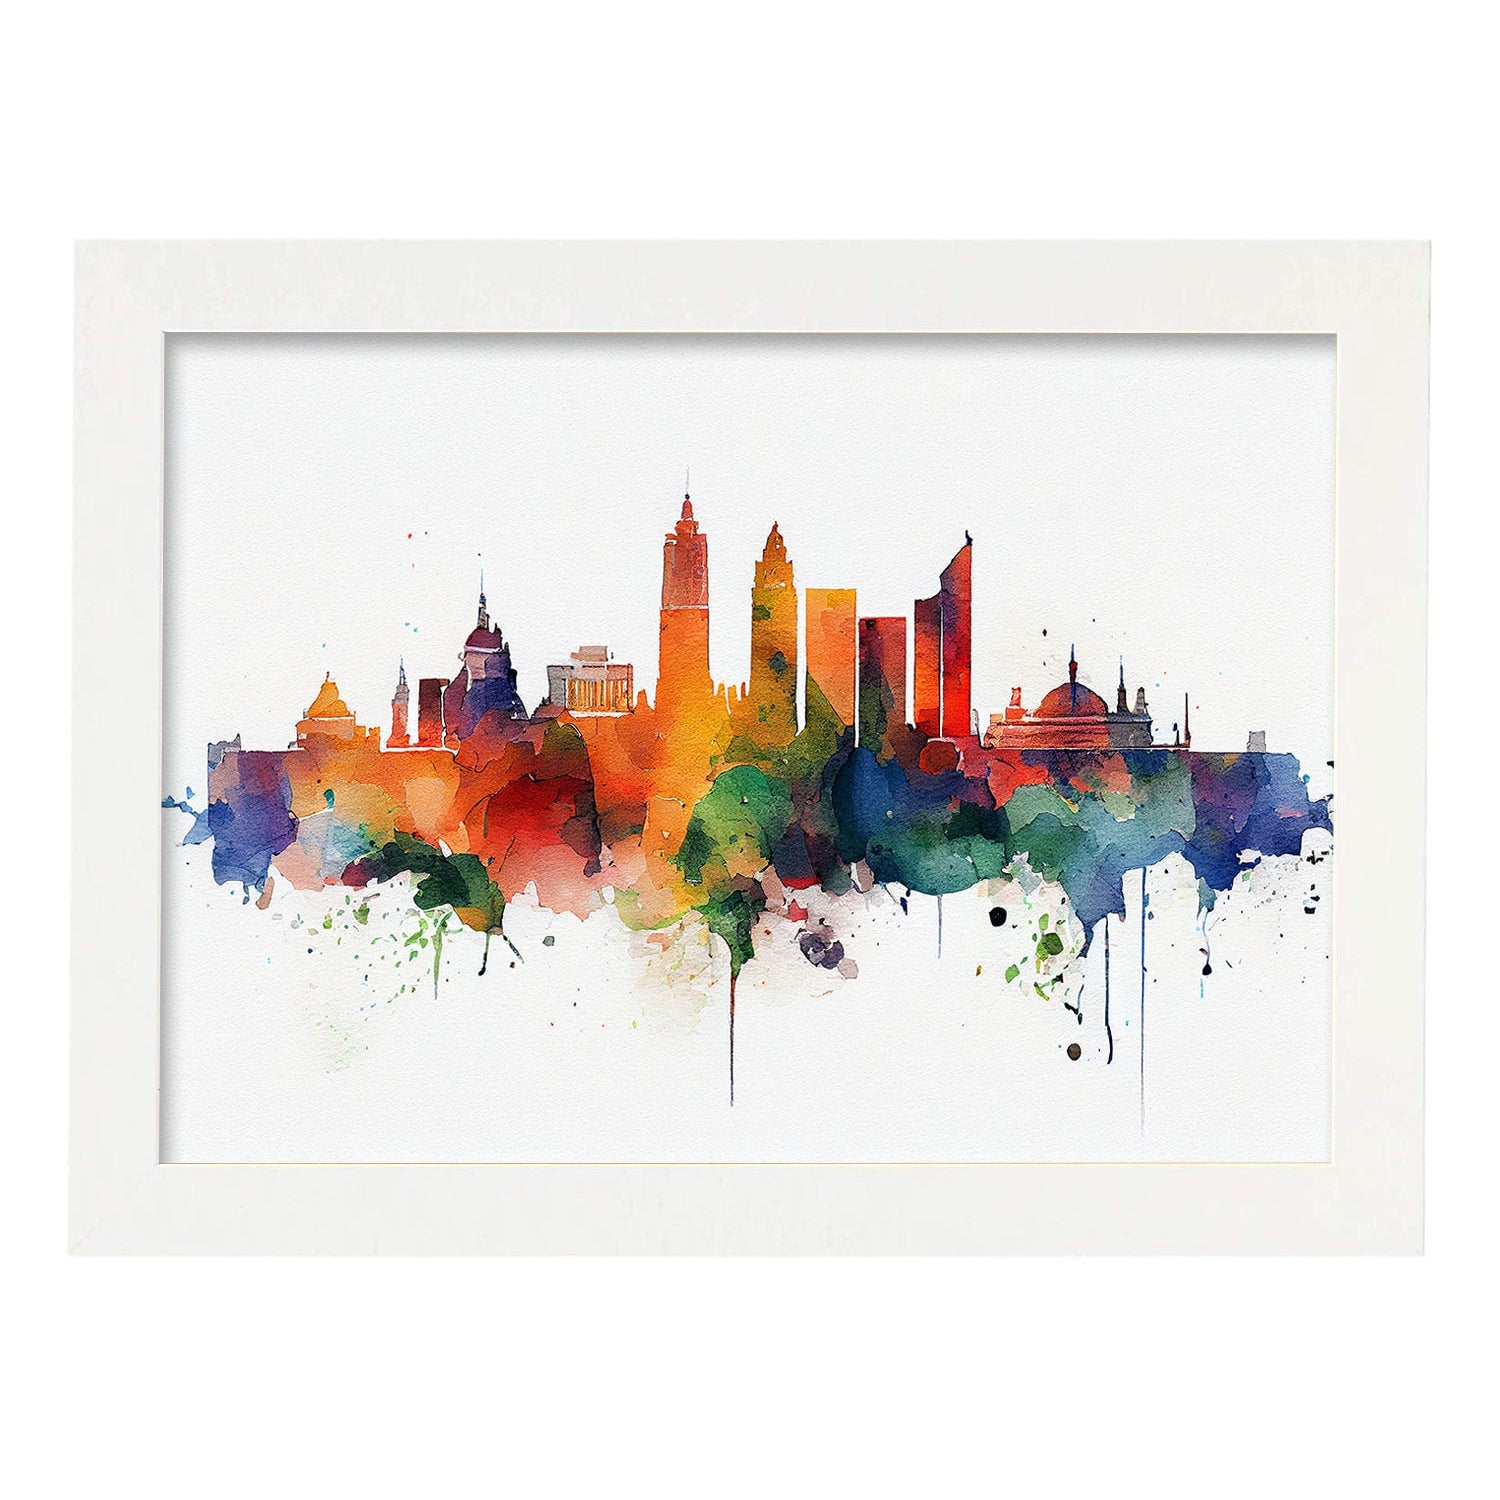 Nacnic watercolor of a skyline of the city of Madrid_3. Aesthetic Wall Art Prints for Bedroom or Living Room Design.-Artwork-Nacnic-A4-Marco Blanco-Nacnic Estudio SL